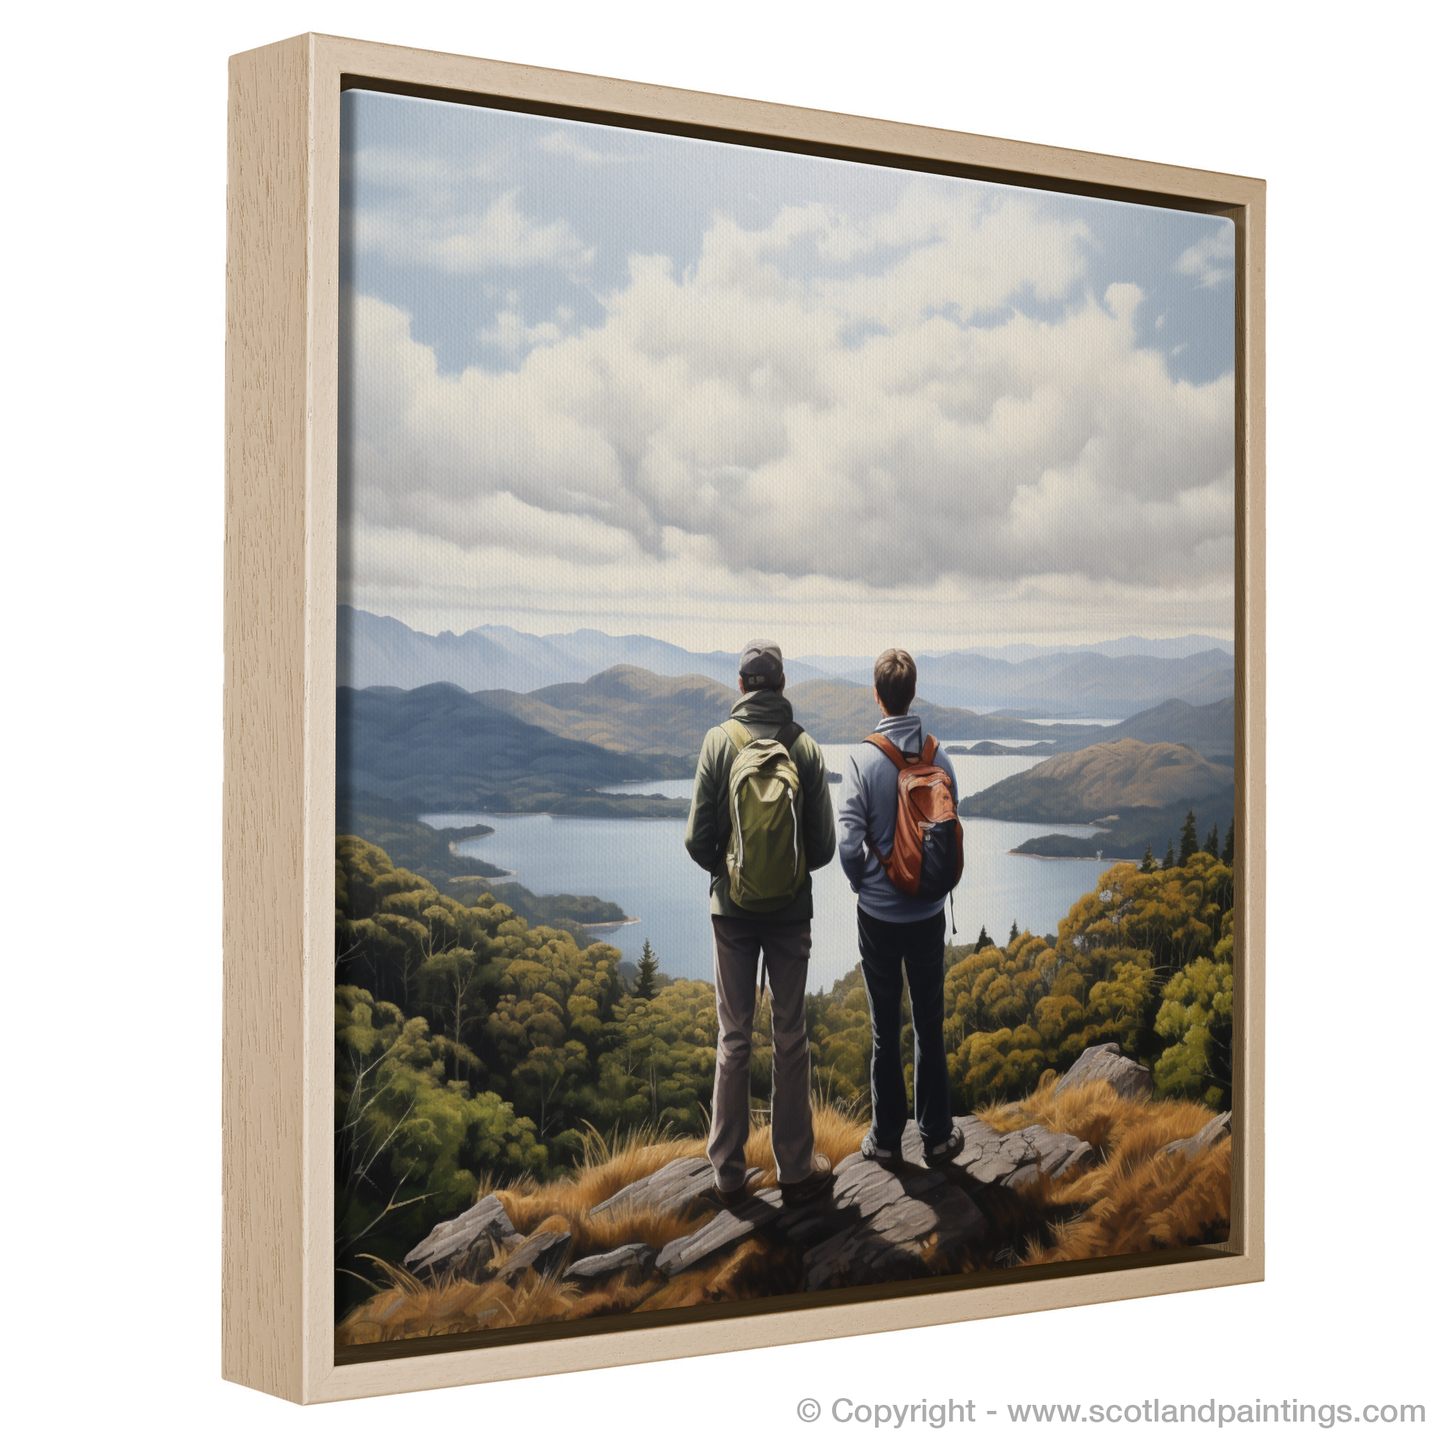 Painting and Art Print of Two hikers looking out on Loch Lomond entitled "Highland Contemplation: Two Hikers and the Serenity of Loch Lomond".